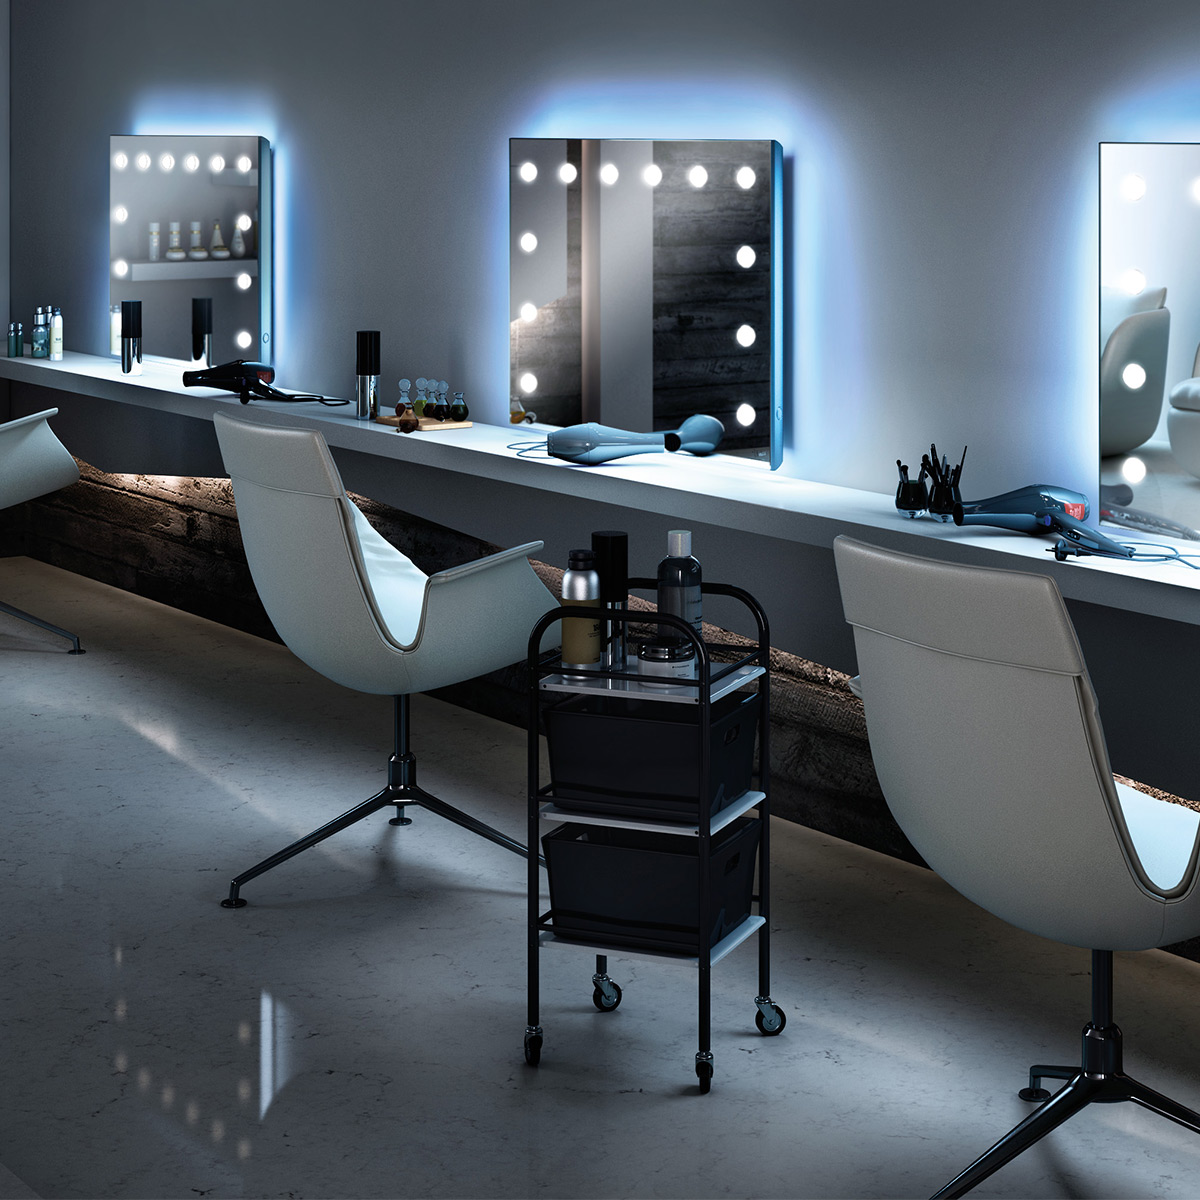 Salon mirrors with lights by Unica Luxury Lighted Mirrors